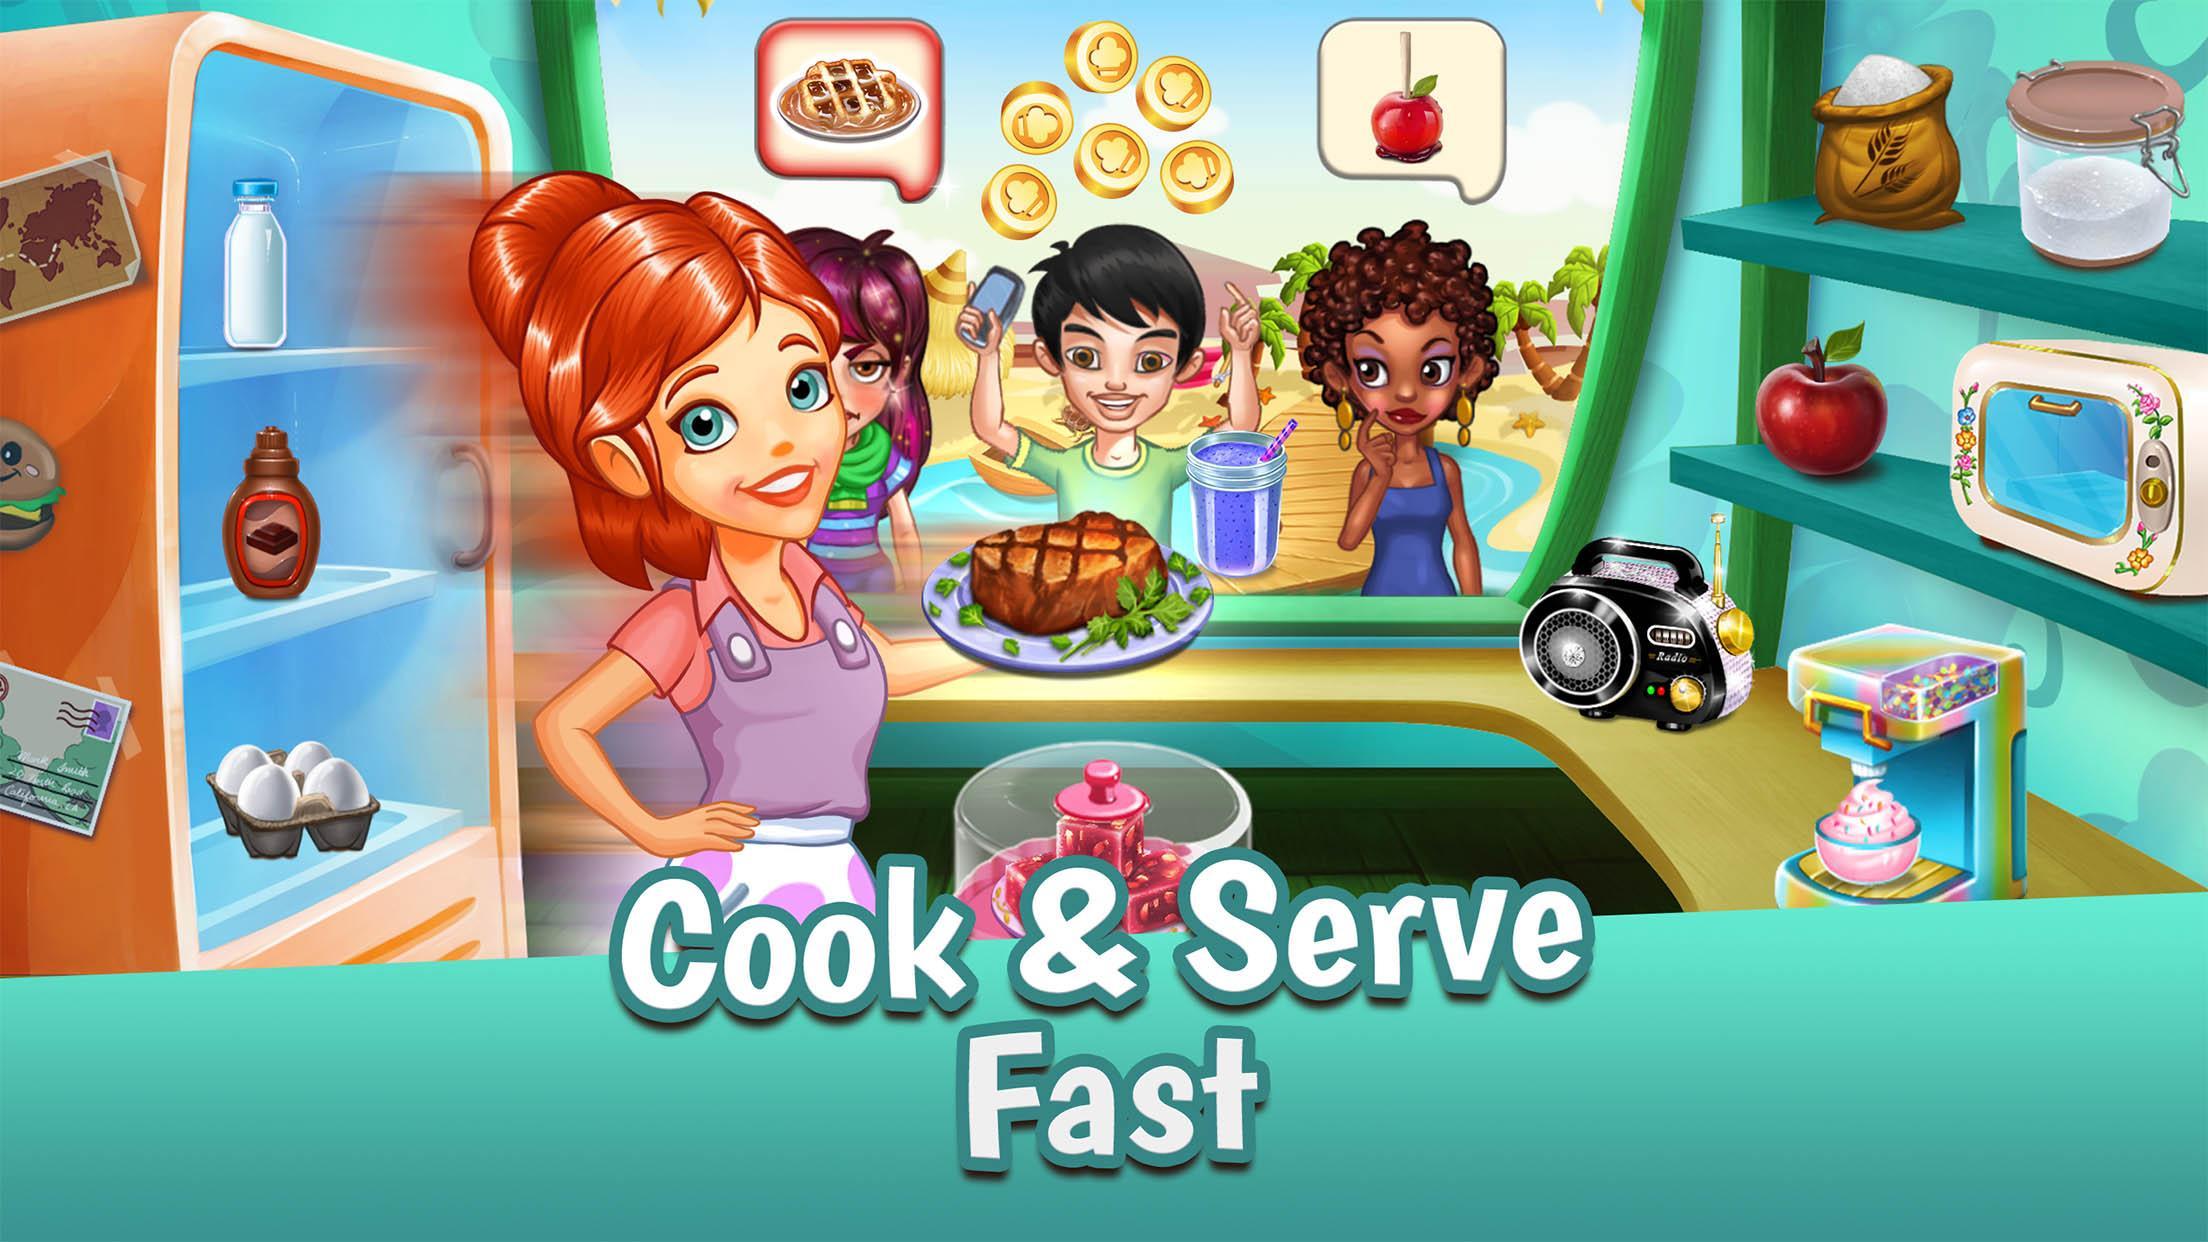 Download cooking academy 3 full version free